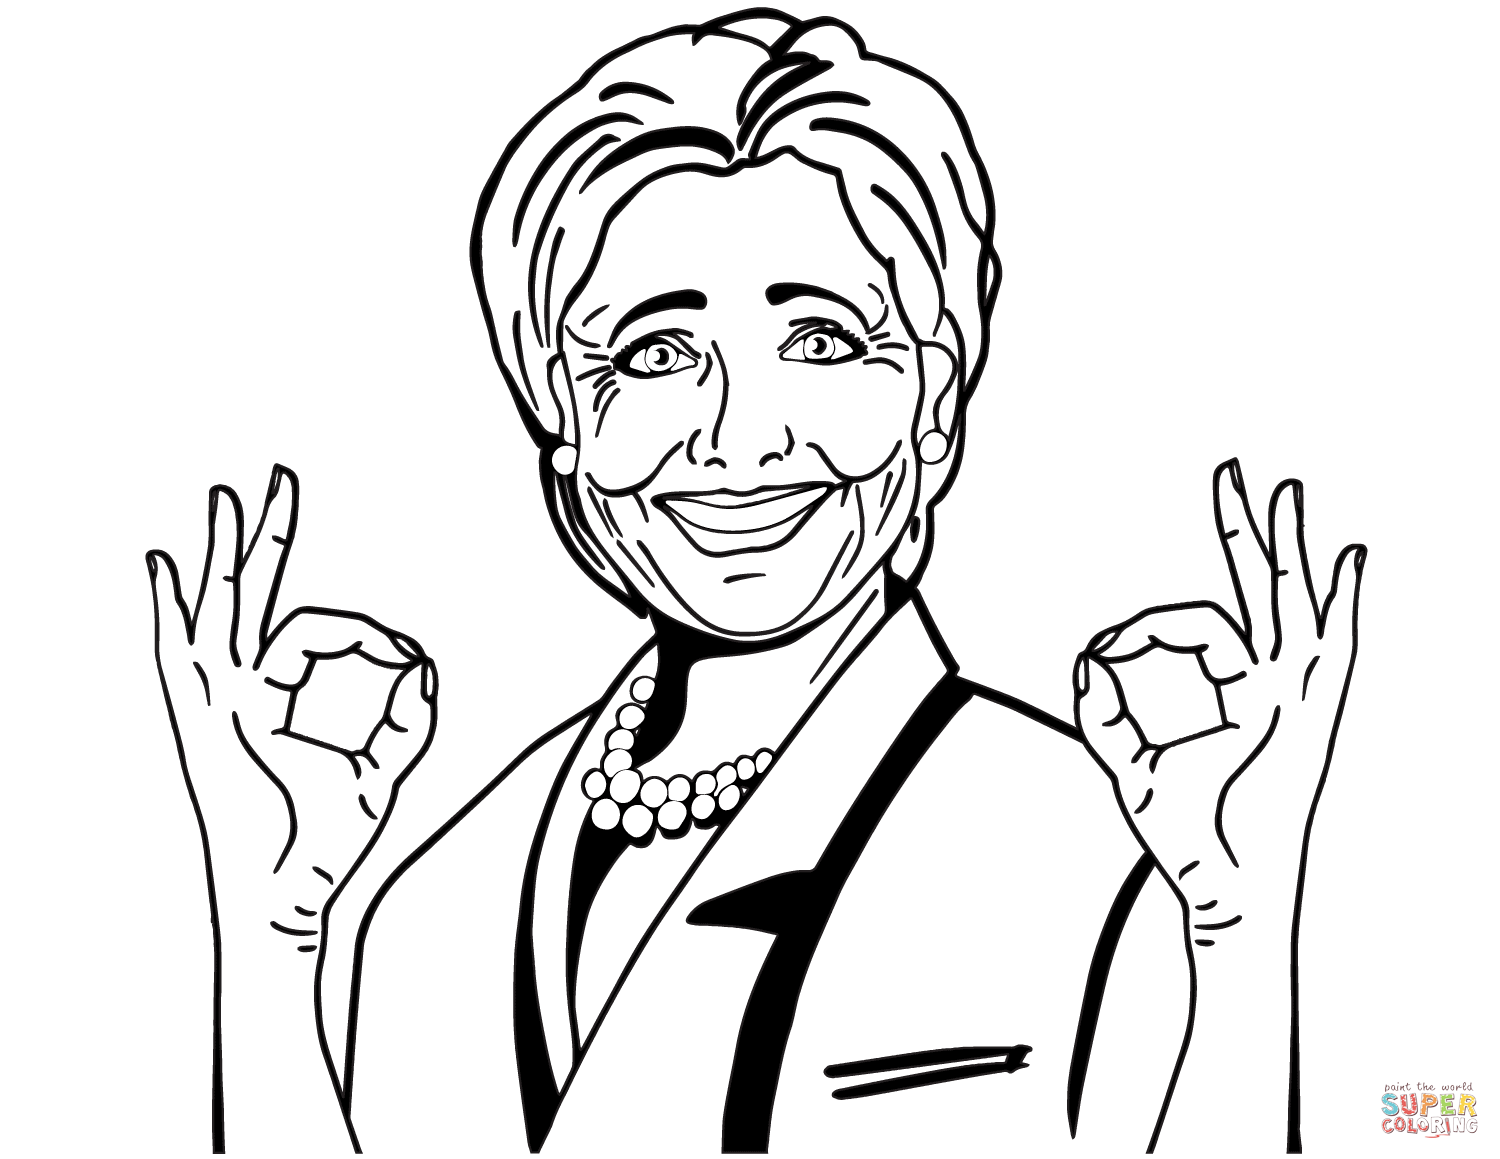 Hillary clinton coloring page free printable coloring pages